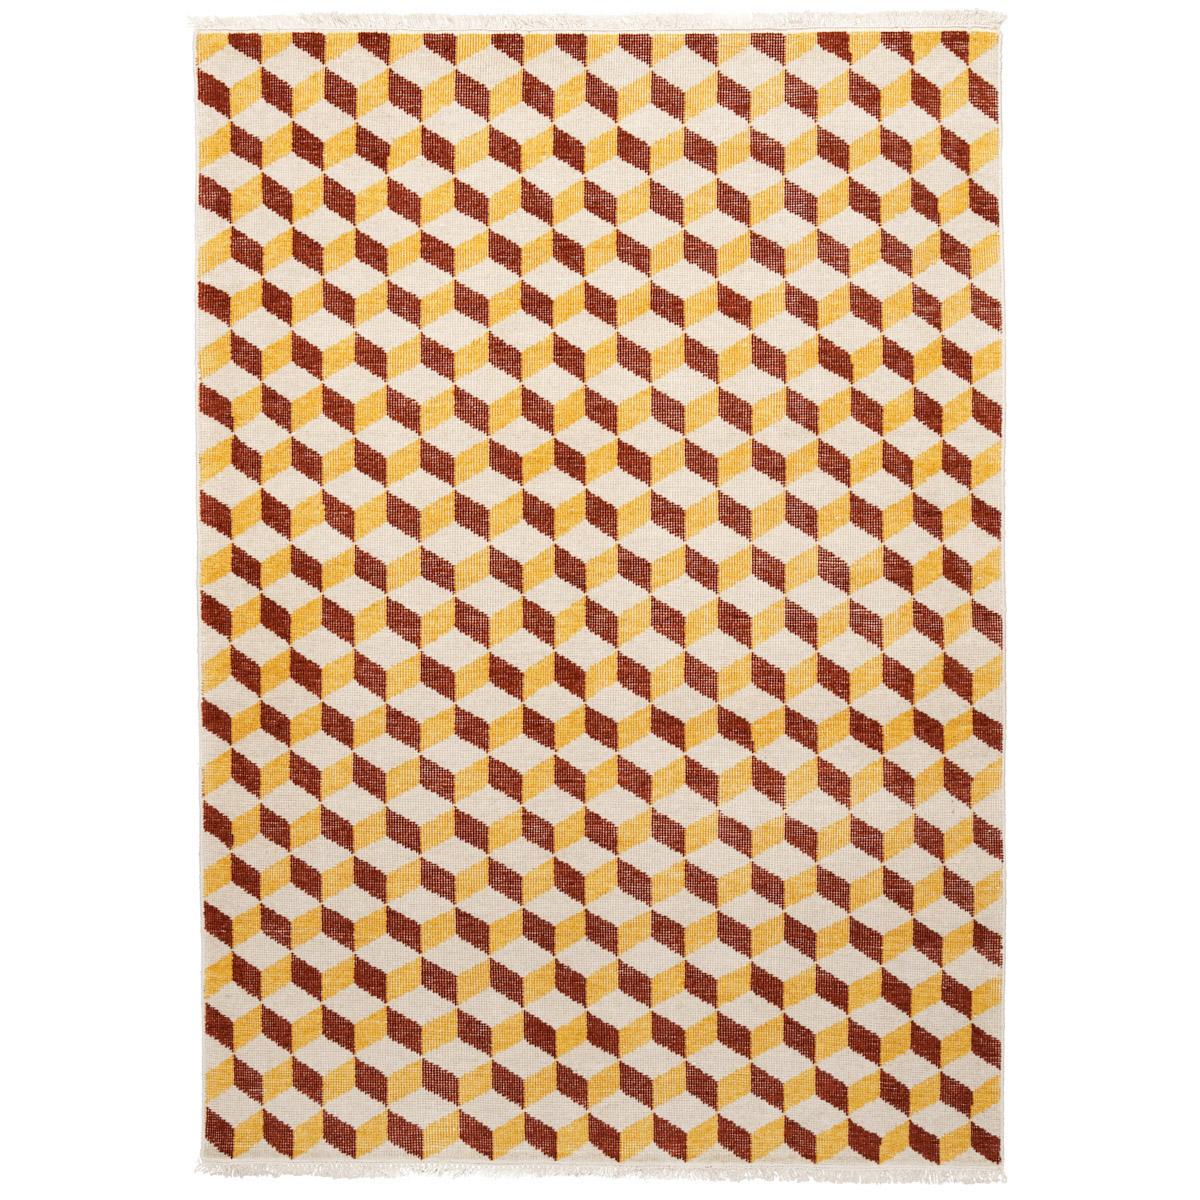 POMPEII HAND-KNOTTED RUG_YELLOW & RED